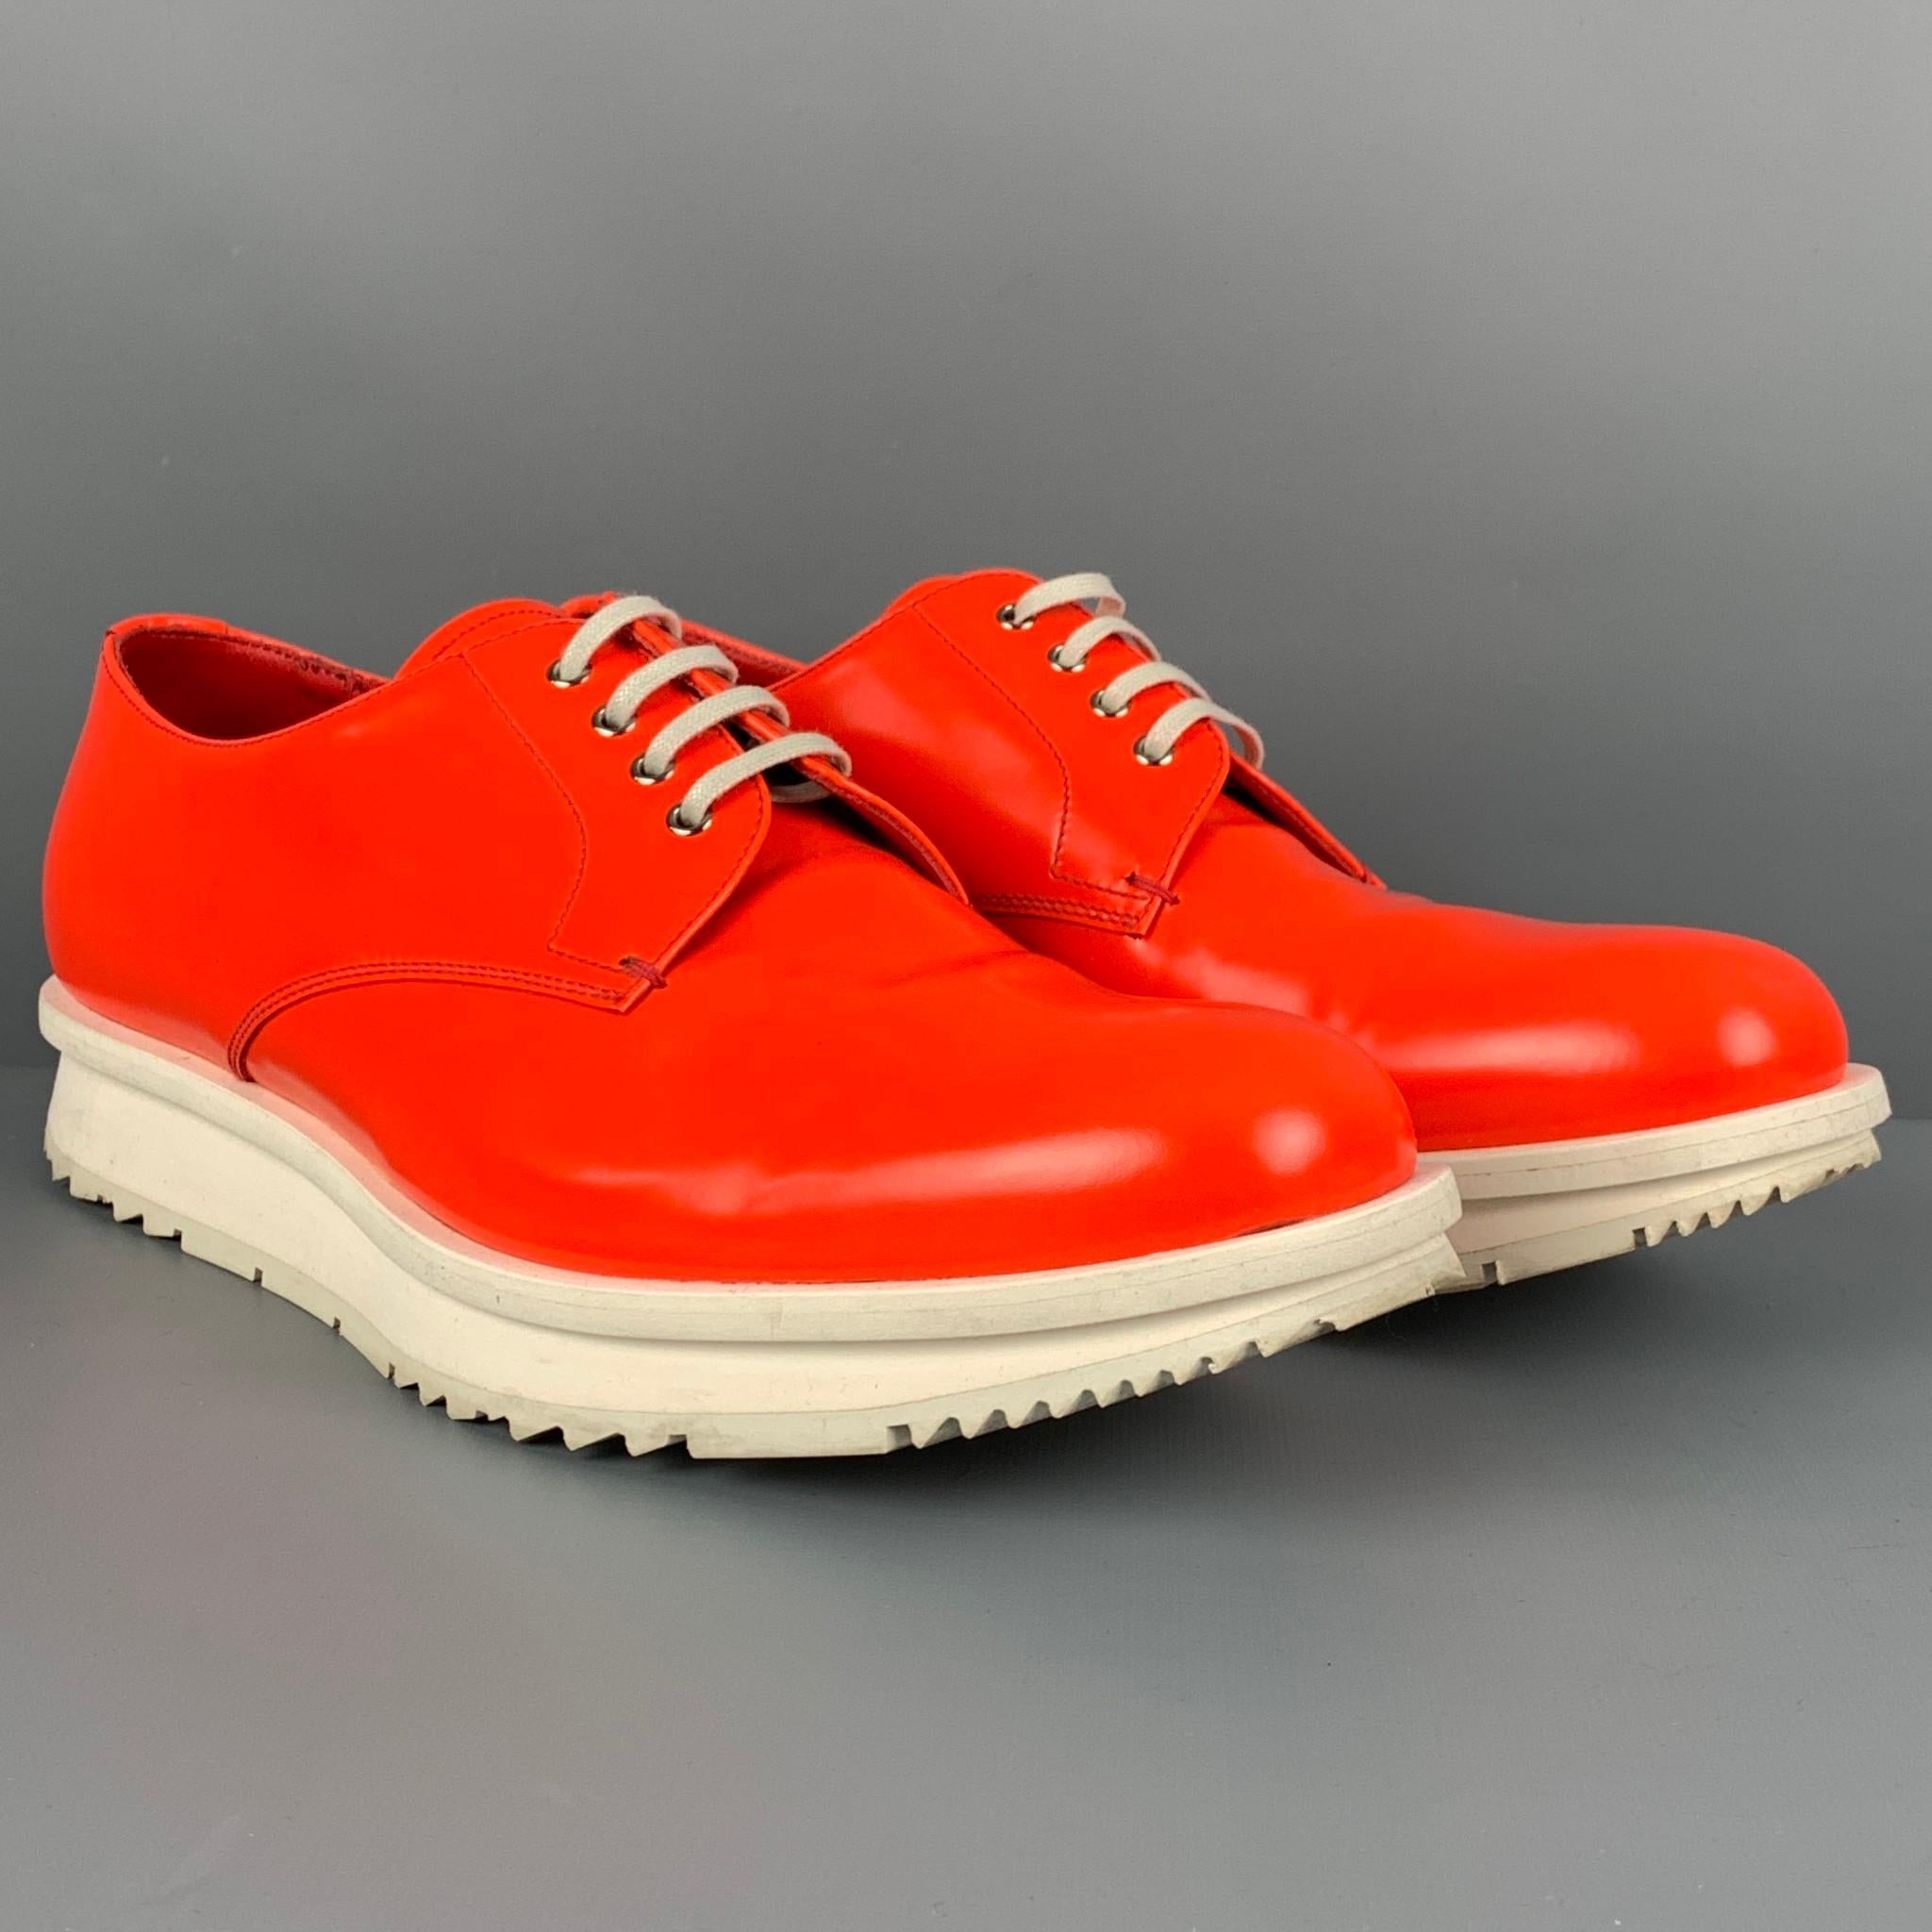 PRADA shoes comes in a orange & white leather featuring a square toe, rubber sole, and a lace up closure. Made in Italy. 

Very Good Pre-Owned Condition.
Marked: 2EE092 8

Outsole: 12 in. x 4 in. 